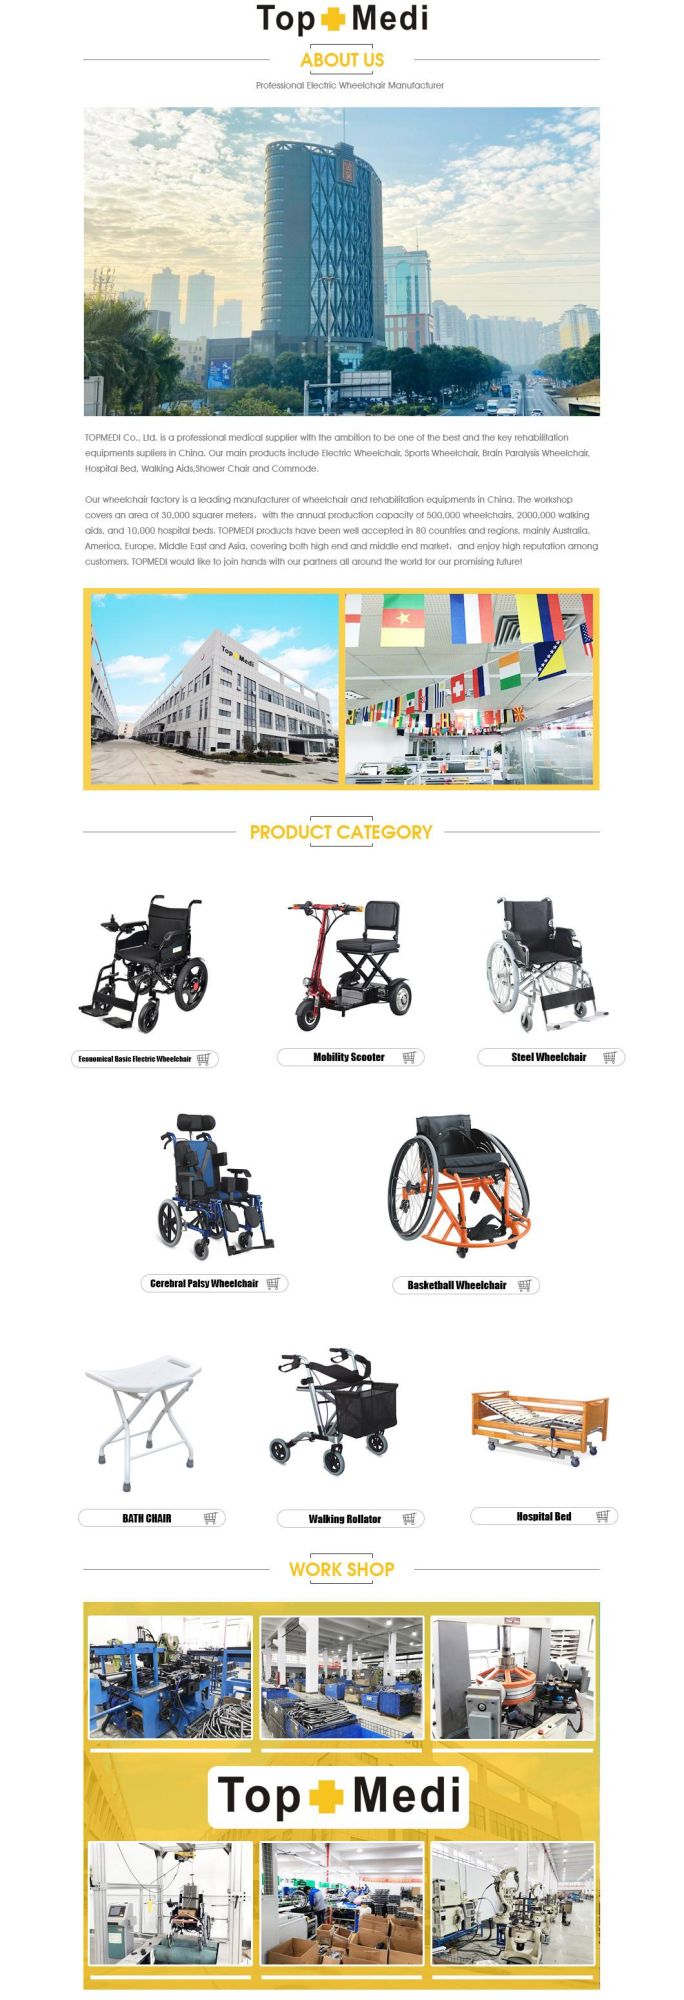 High Quality Manual Handicapped Aluminum Wheelchair